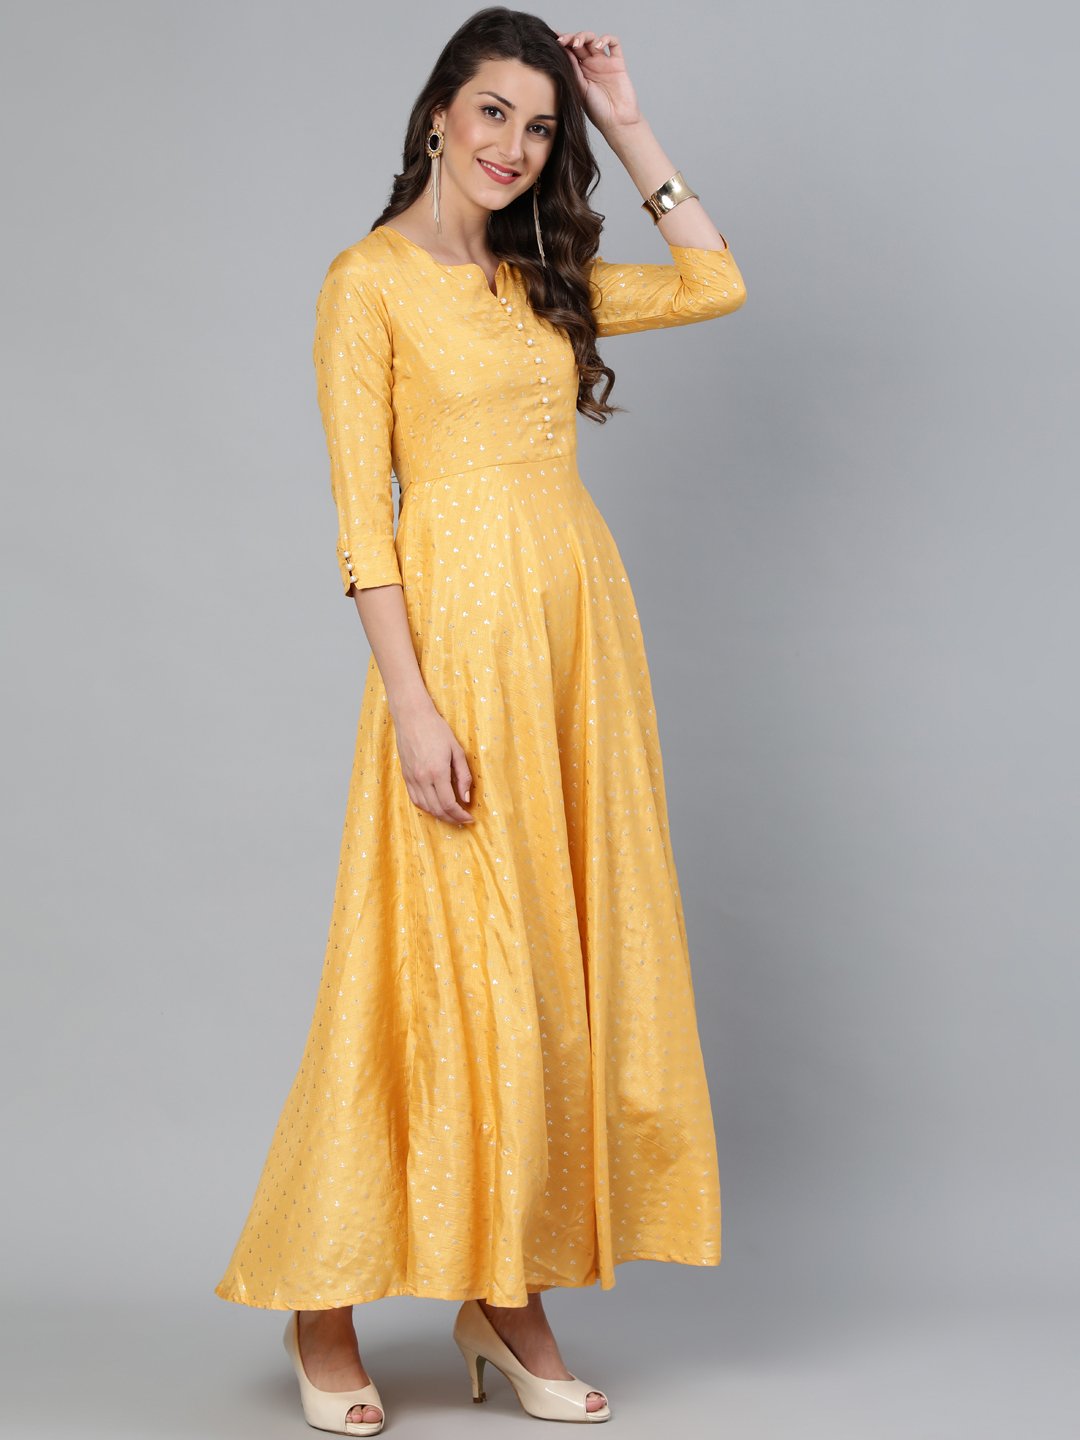 Women's Mustard Foil Printed Maxi Dress With Embroidered Net Dupatta - Nayo Clothing